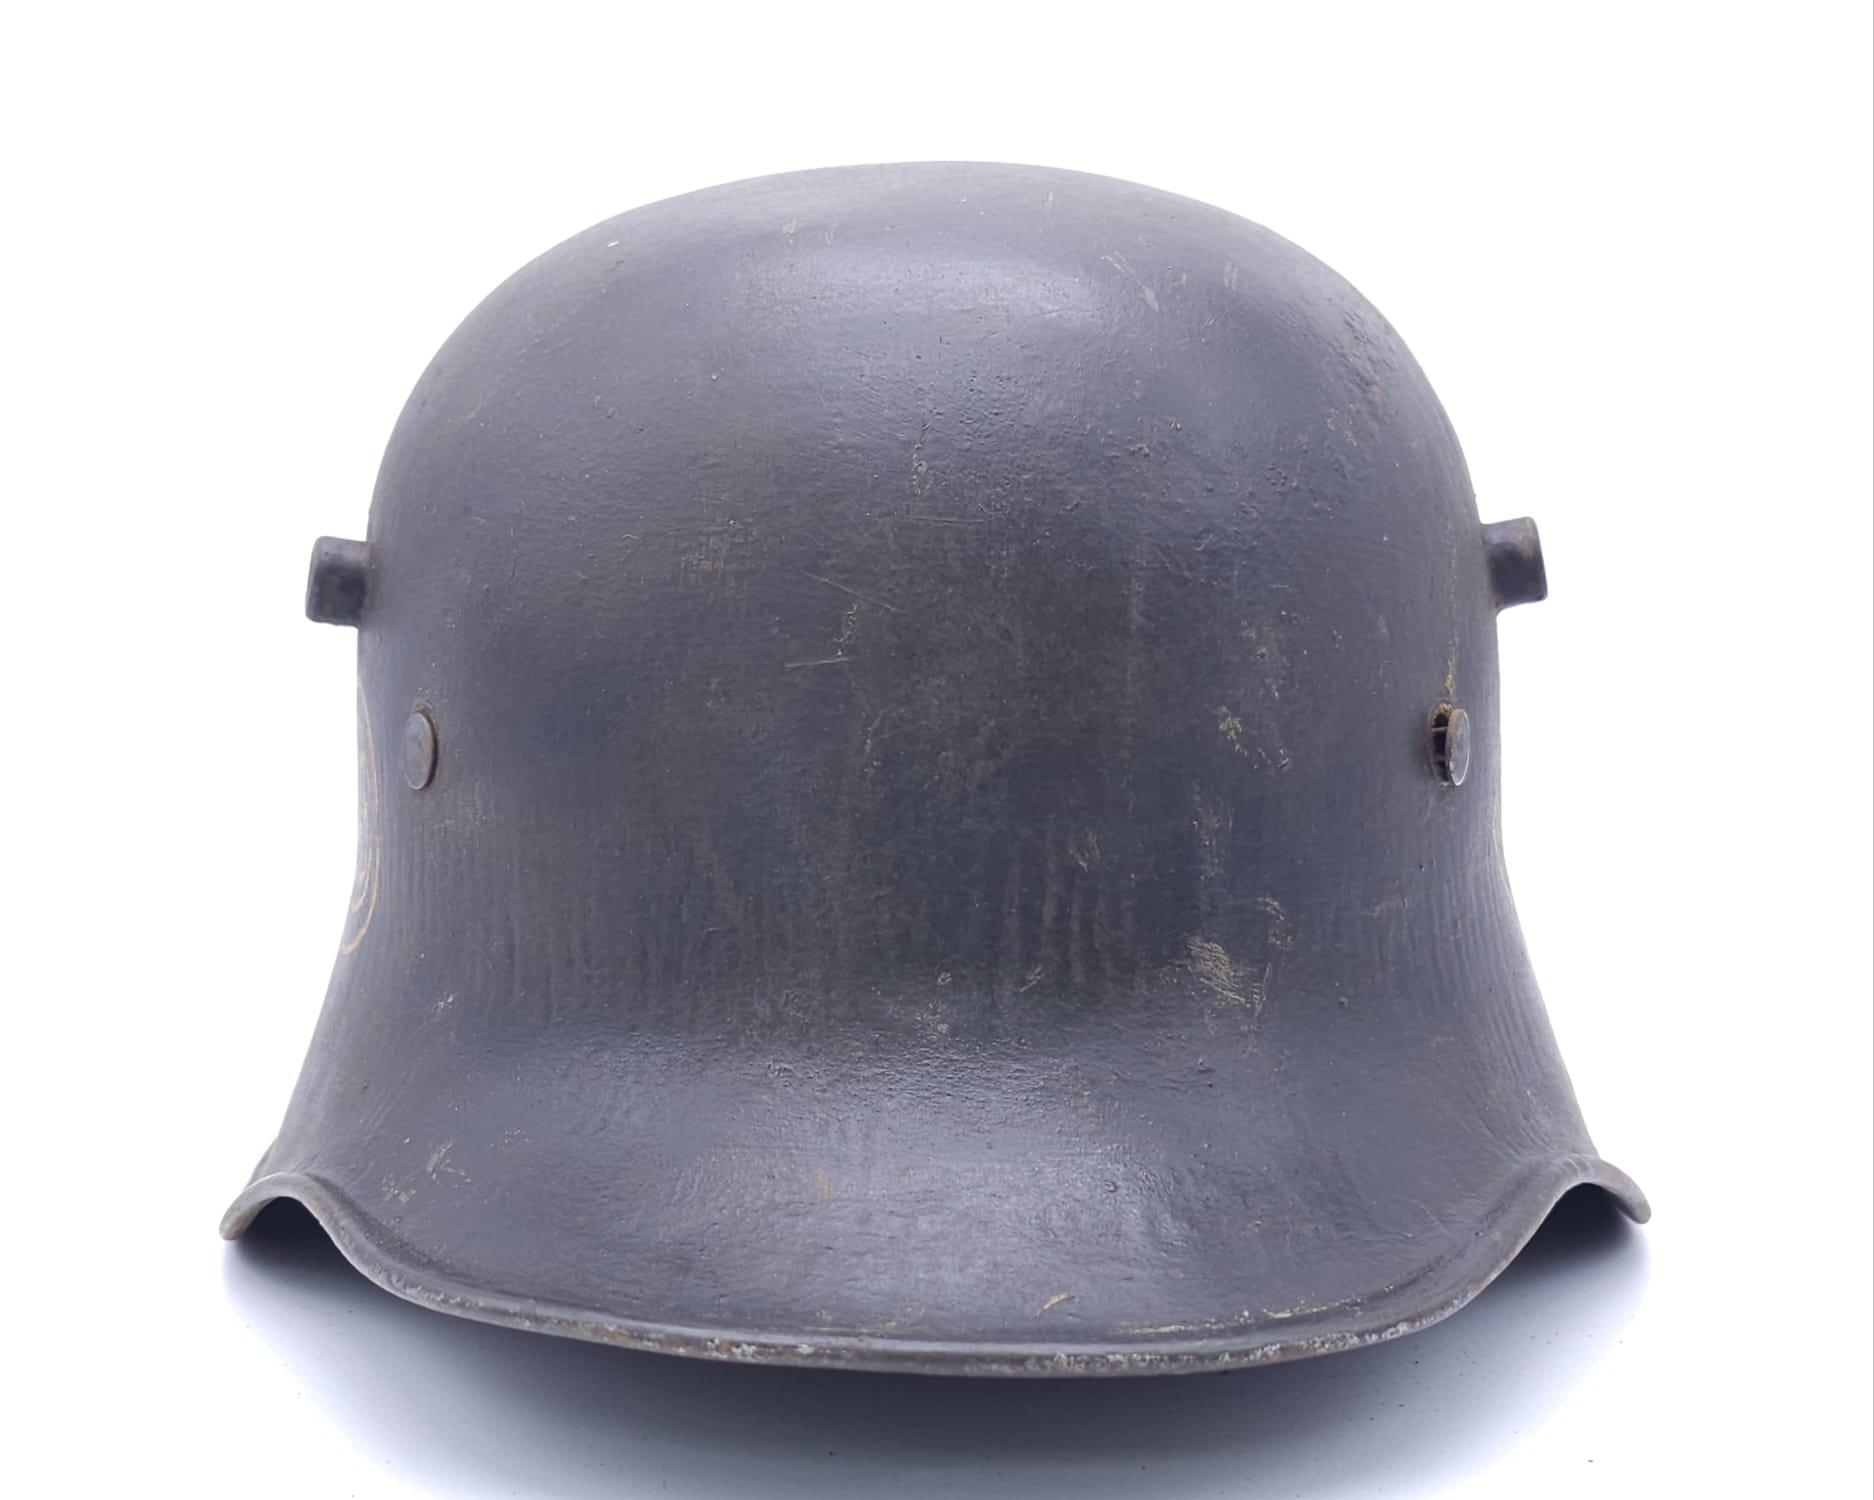 3rd Reich Transitional SS-VT M18 Helmet. - Image 3 of 9